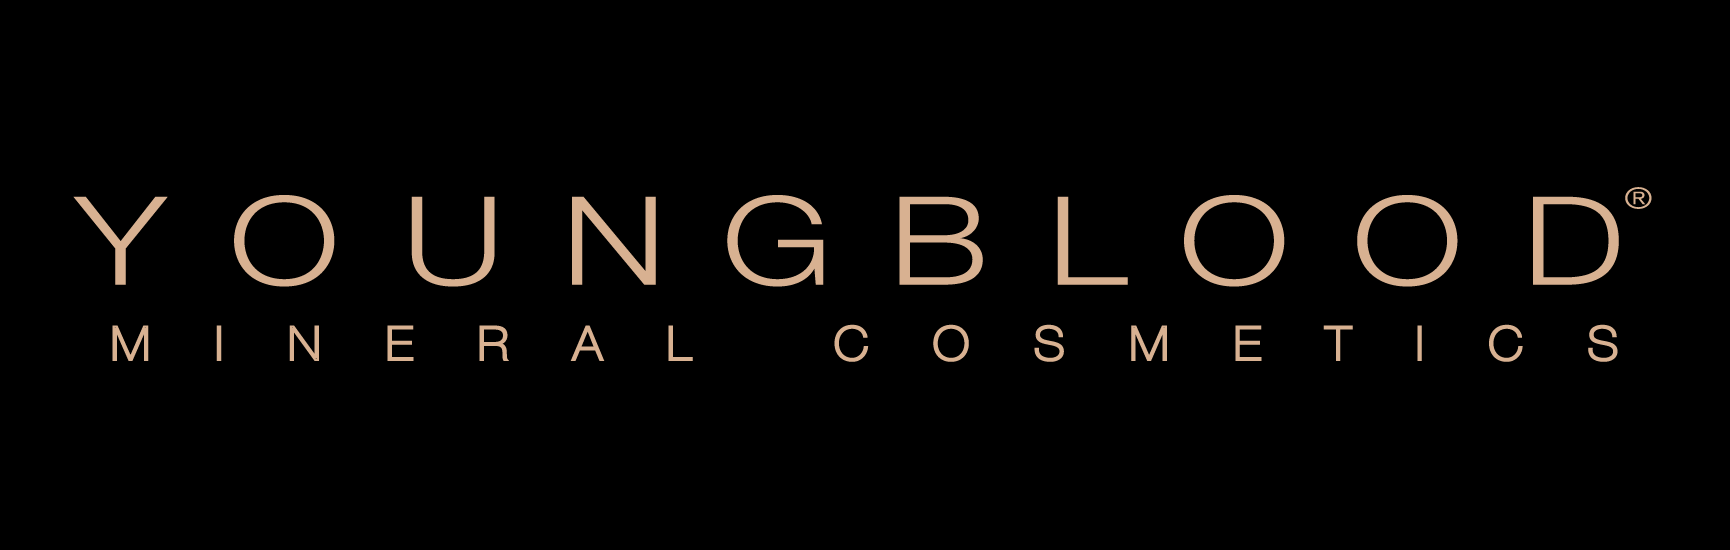 logo YOUNGBLOOD MINERAL COSMETICS